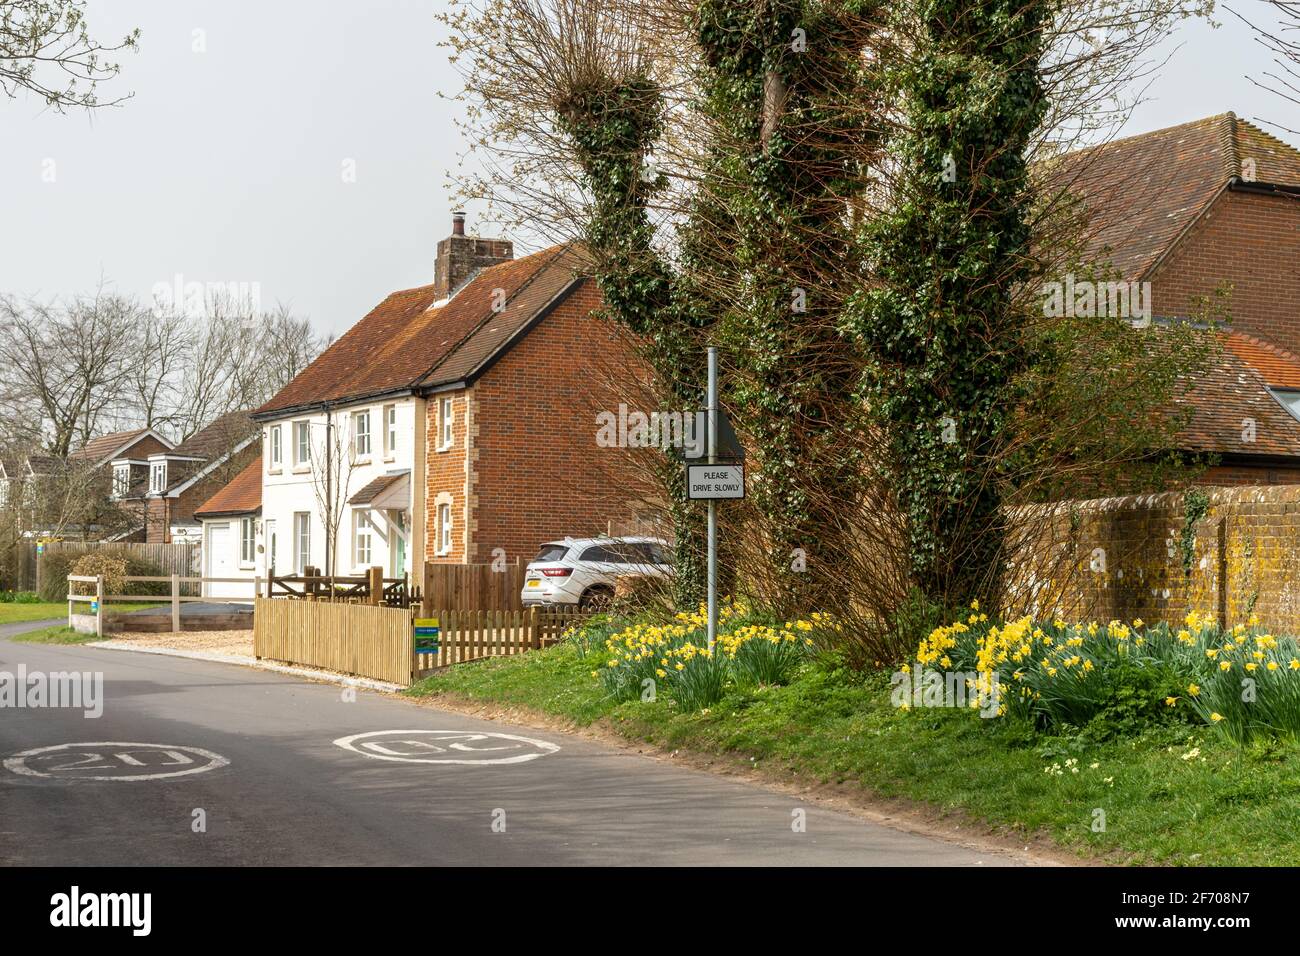 Dummer village in Hampshire, England, UK, during spring Stock Photo